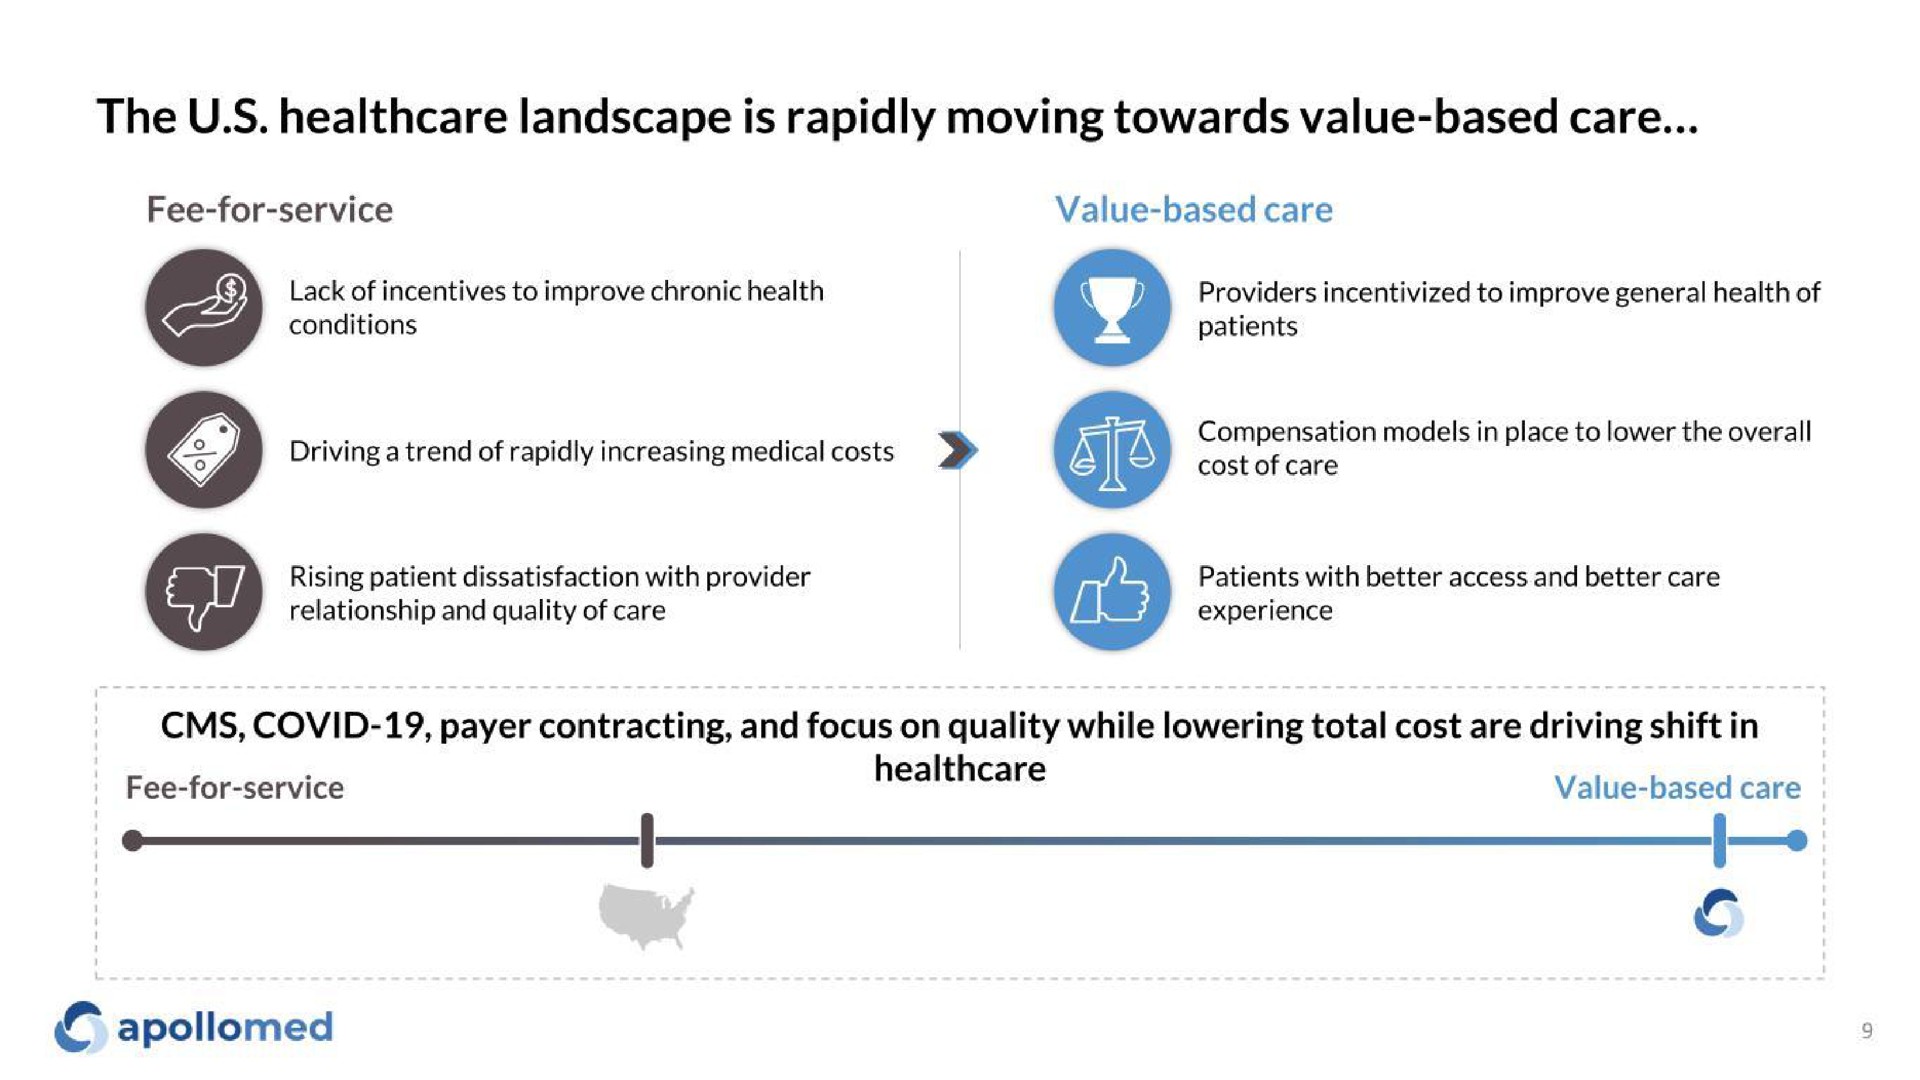 the landscape is rapidly moving towards value based care | Apollo Medical Holdings